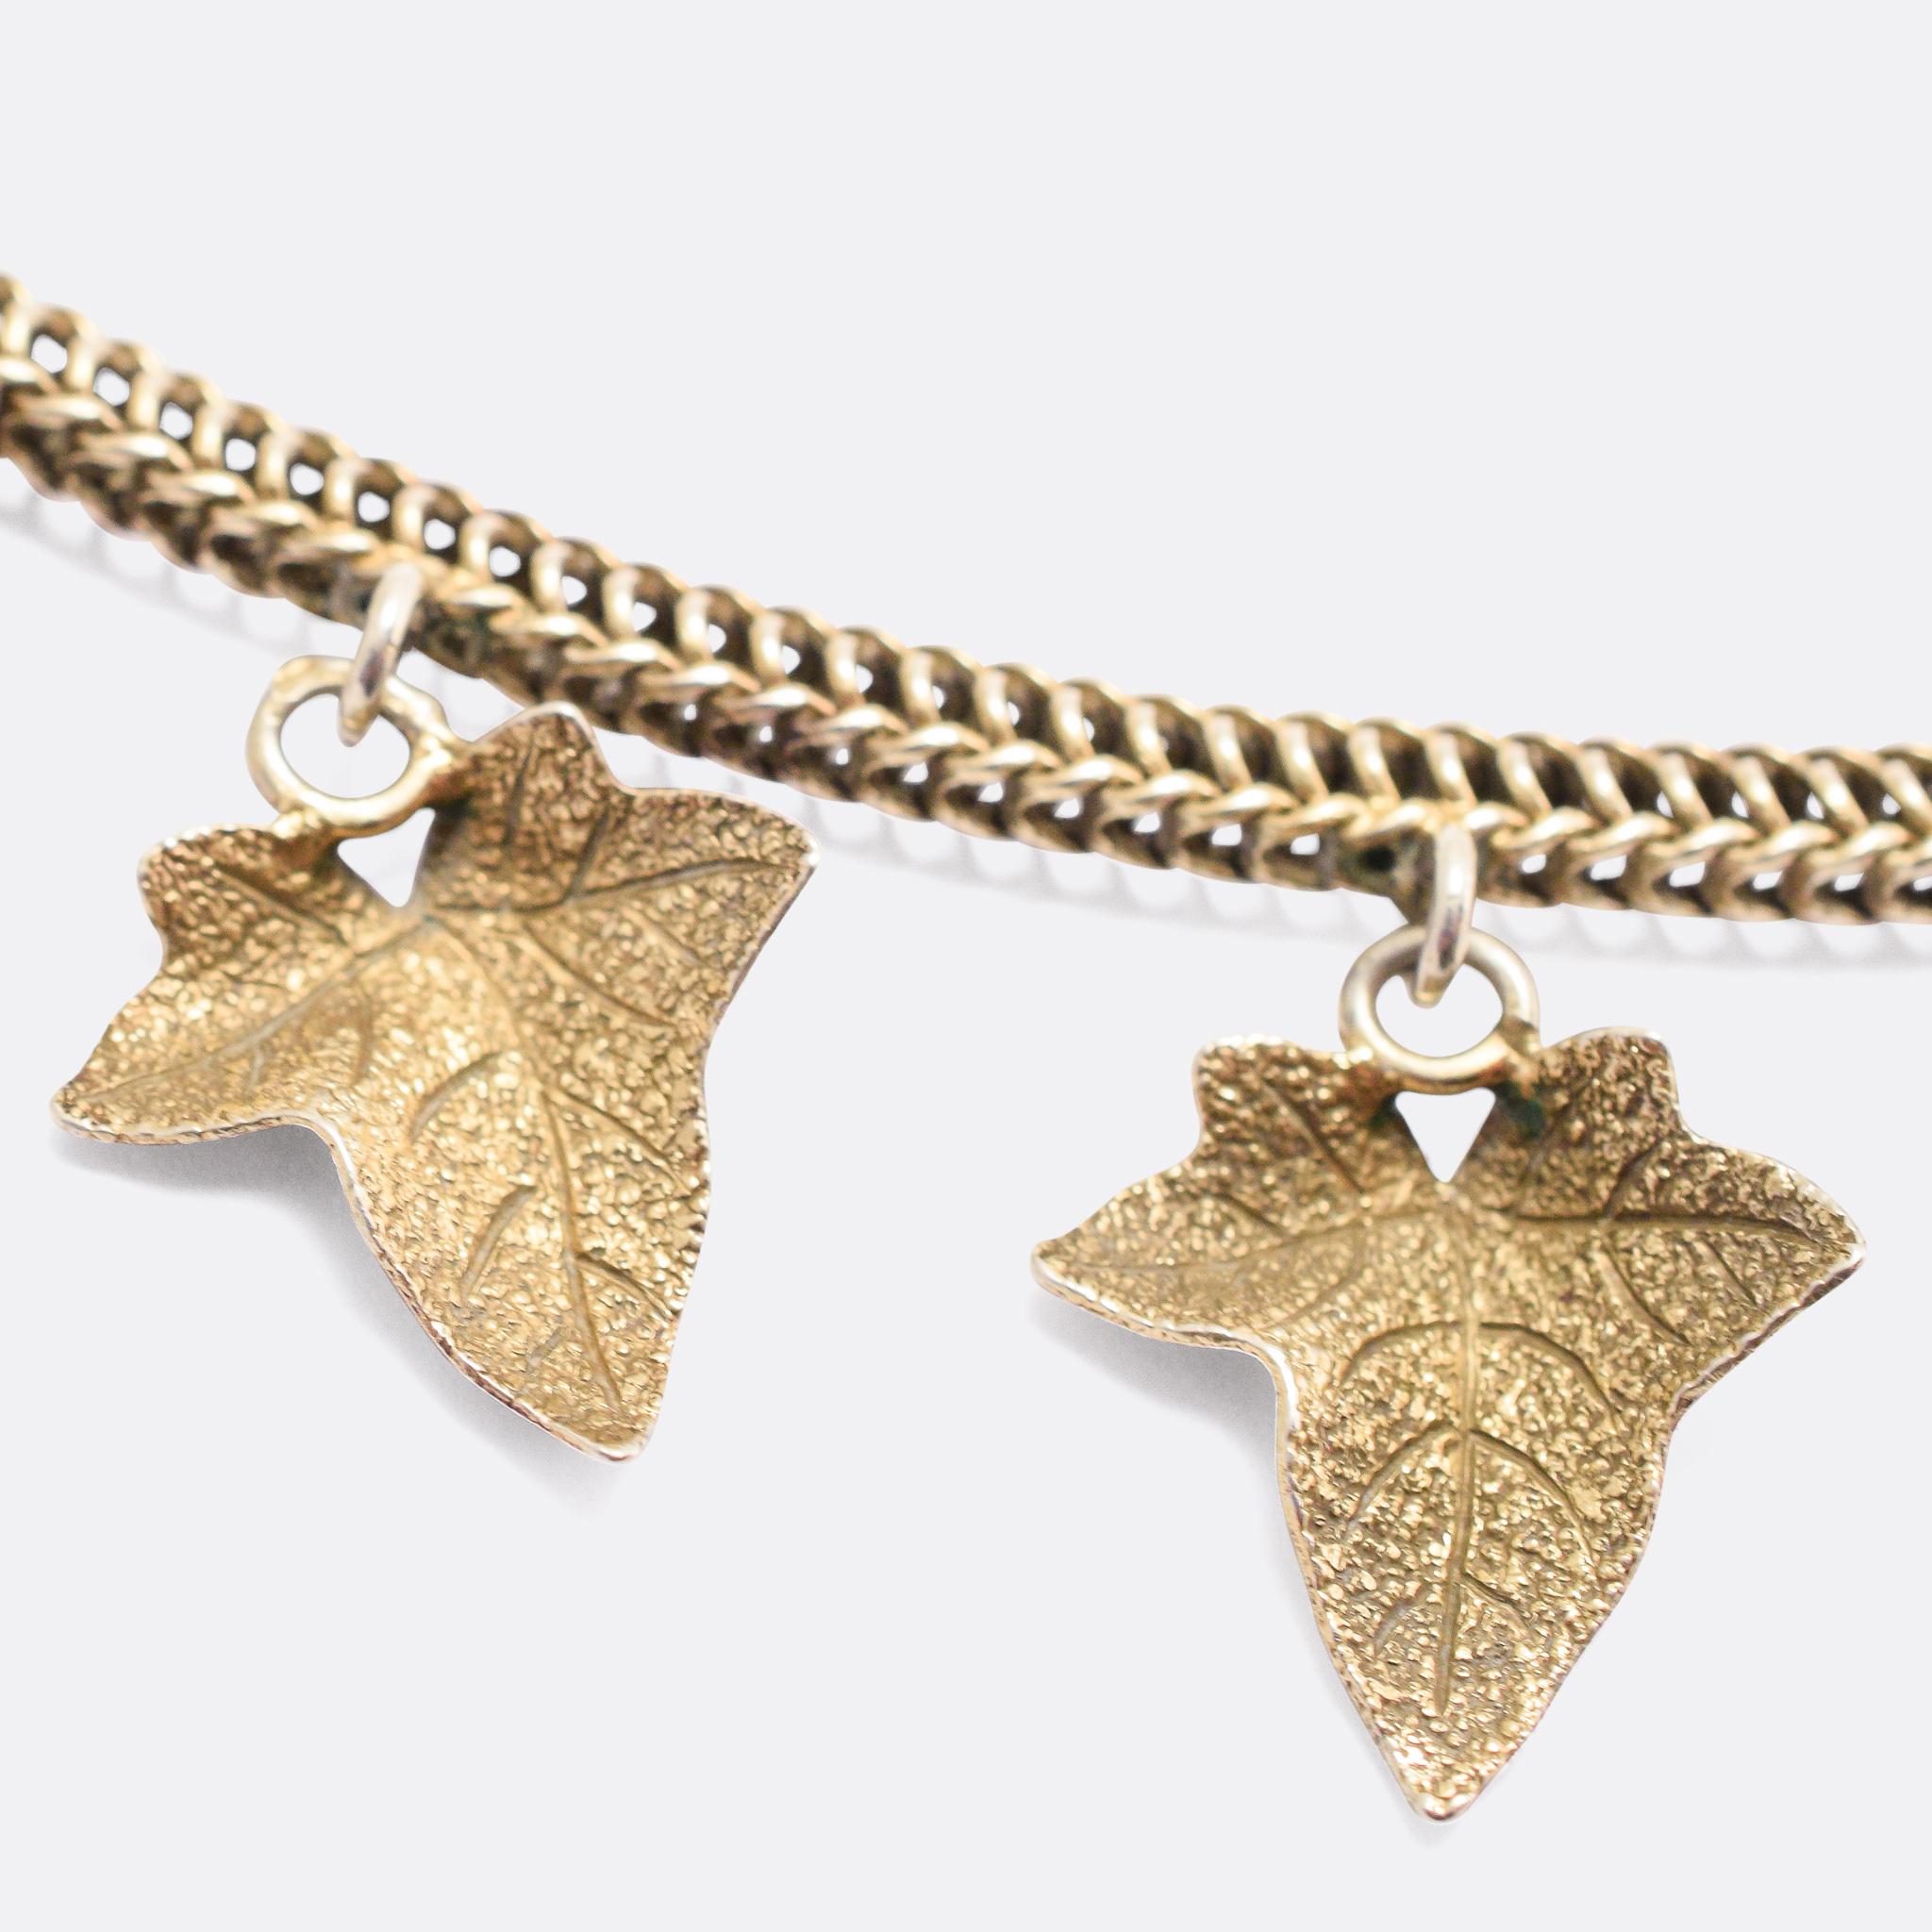 A gorgeous antique silver necklace dating from the mid Victorian era, circa 1870. The finely worked chain is adorned with twenty lightly gilded Ivy Leaves, featuring beautifully textured detailing. To the Victorians, Ivy symbolised friendship and